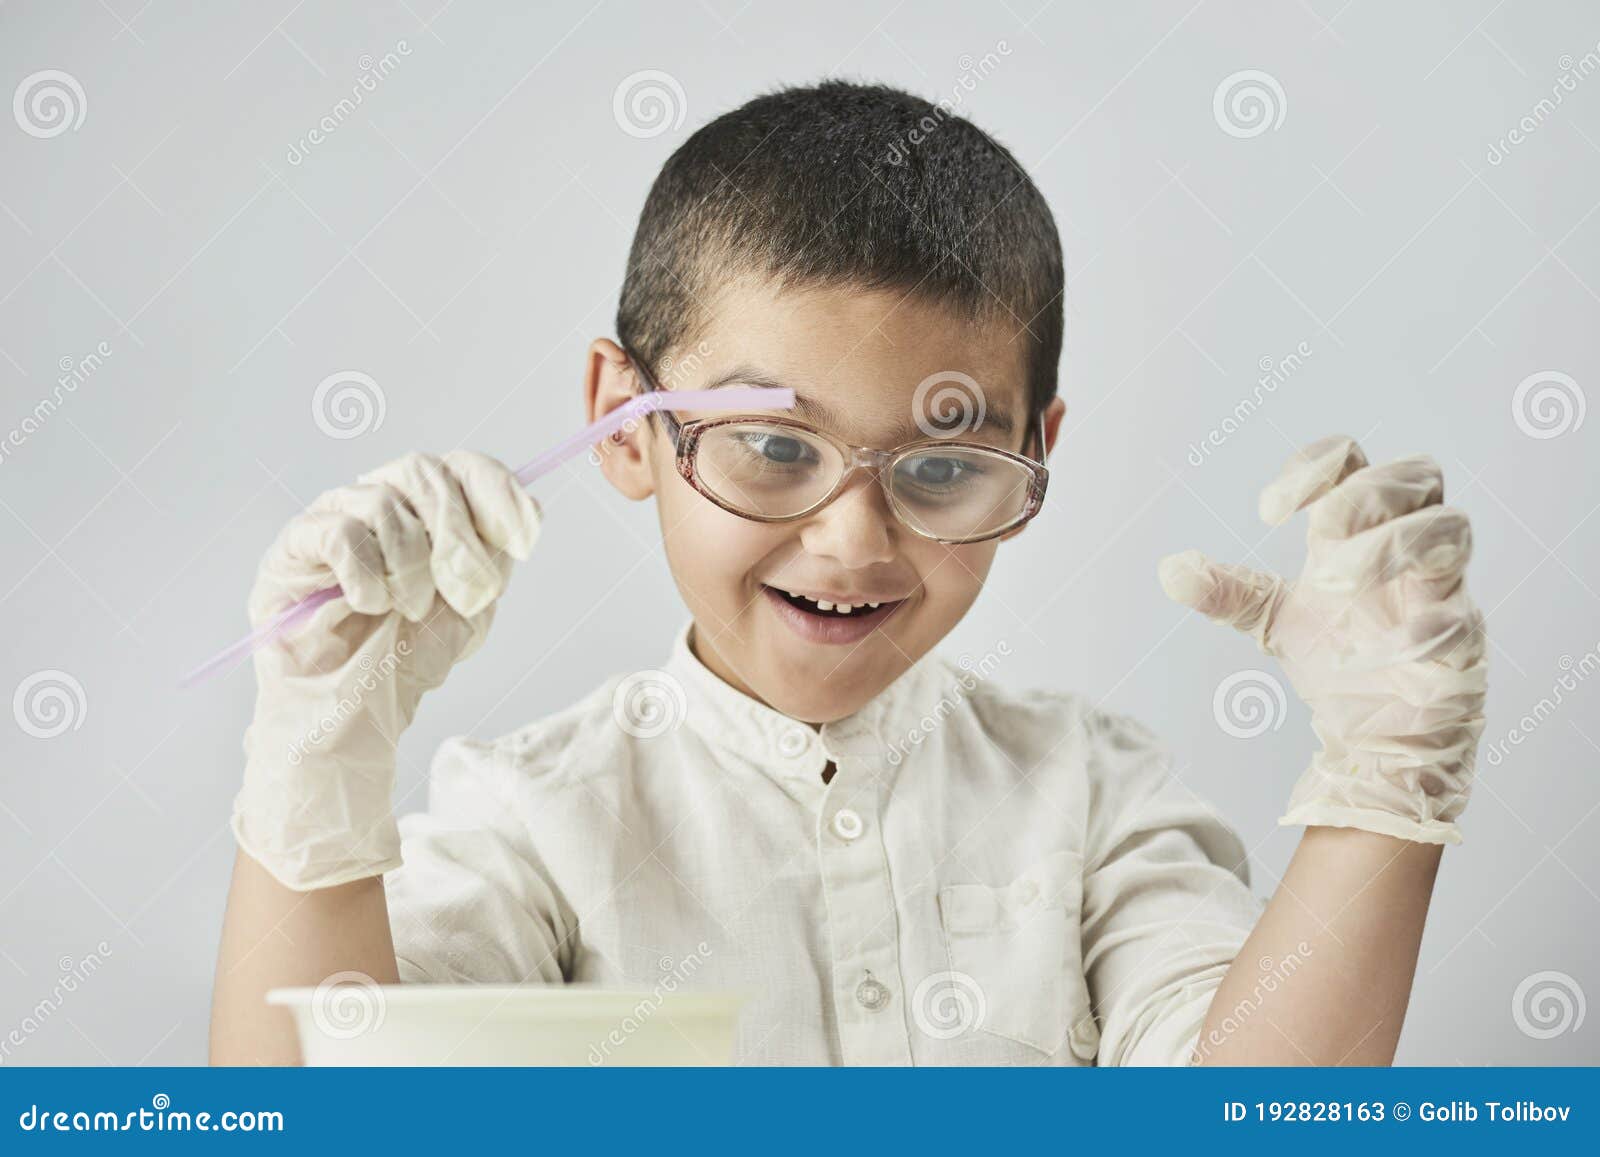 Funny Kid Making Experiments at the Workshop and Exploring the ...